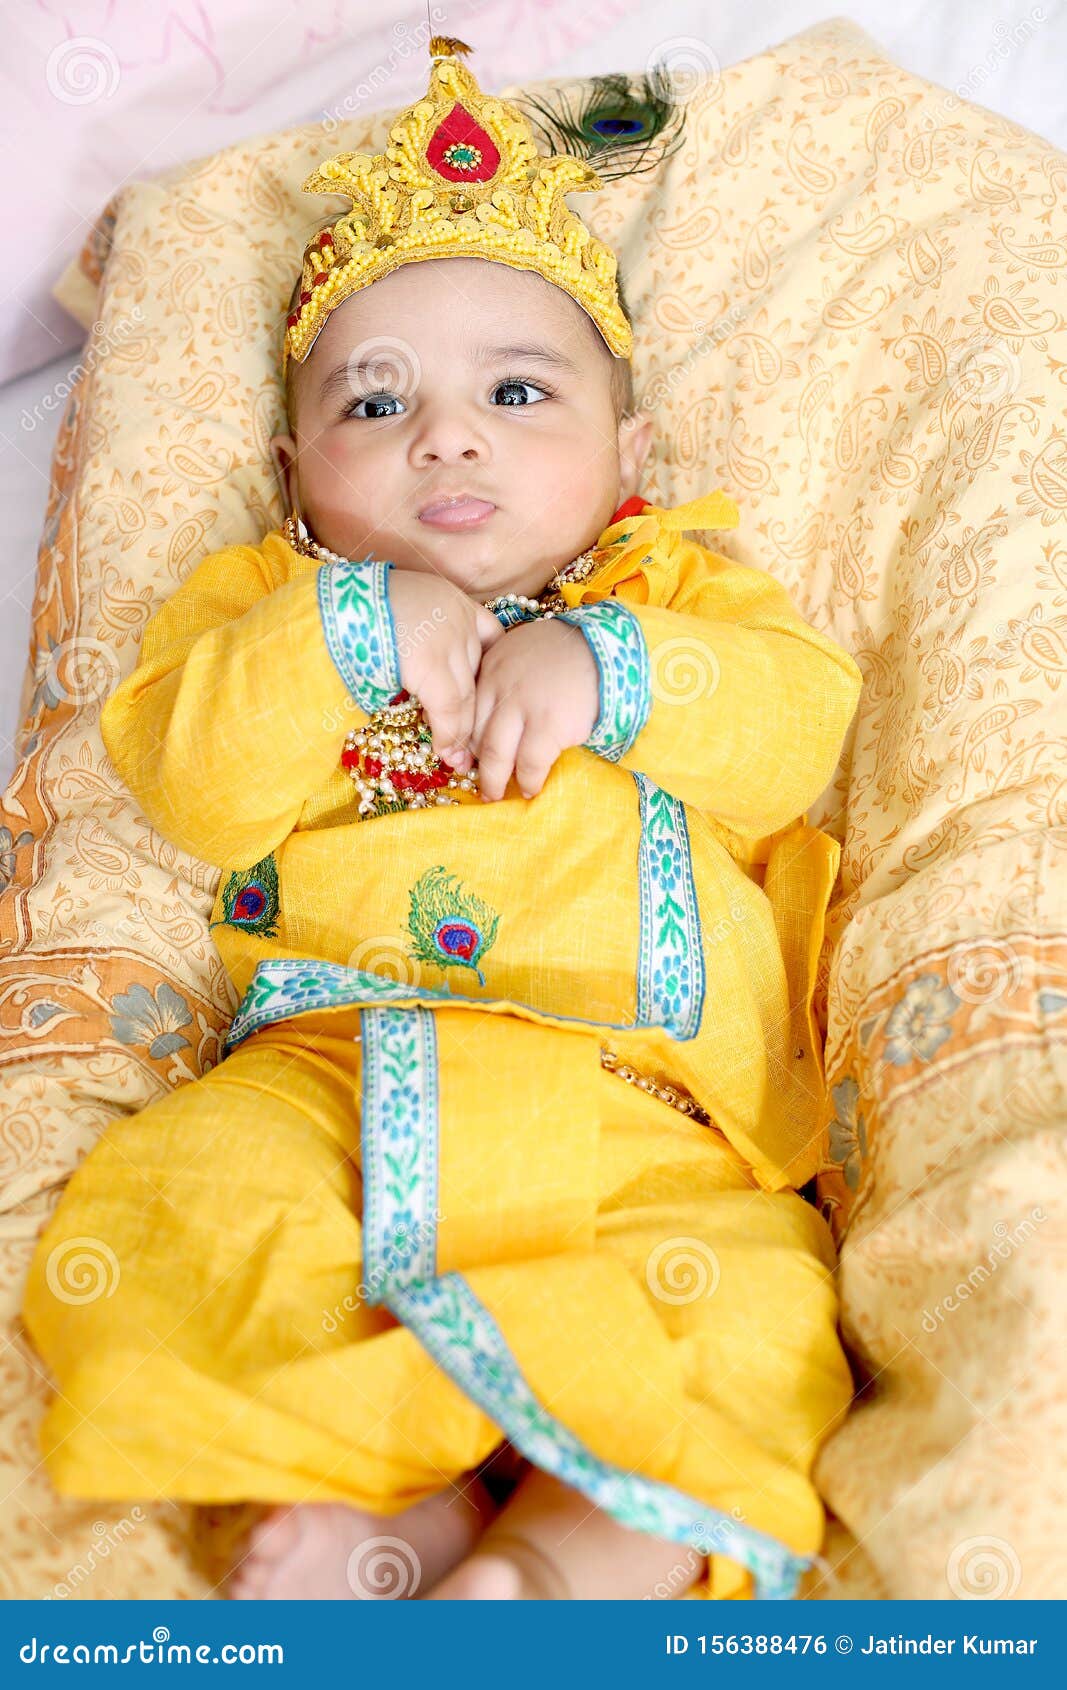 Picture of Baby krishna. stock photo. Image of epic - 156388476